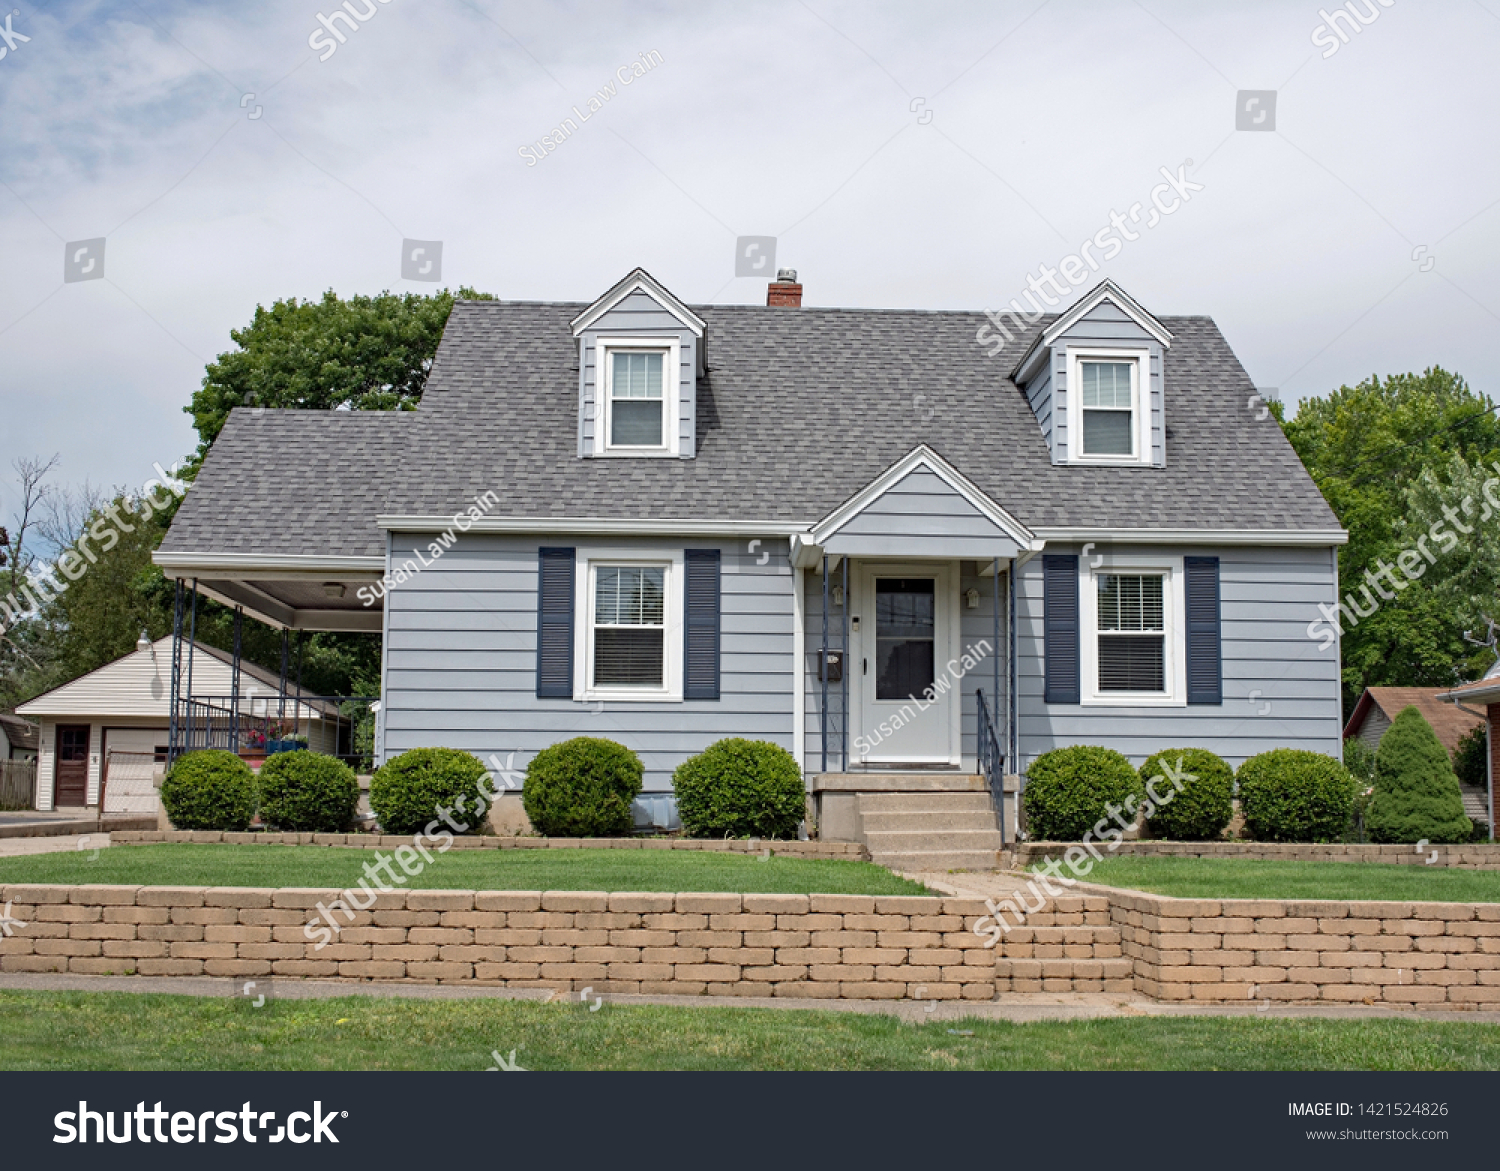 Little Blue Cape Cod House with Tan Brick Wall #1421524826